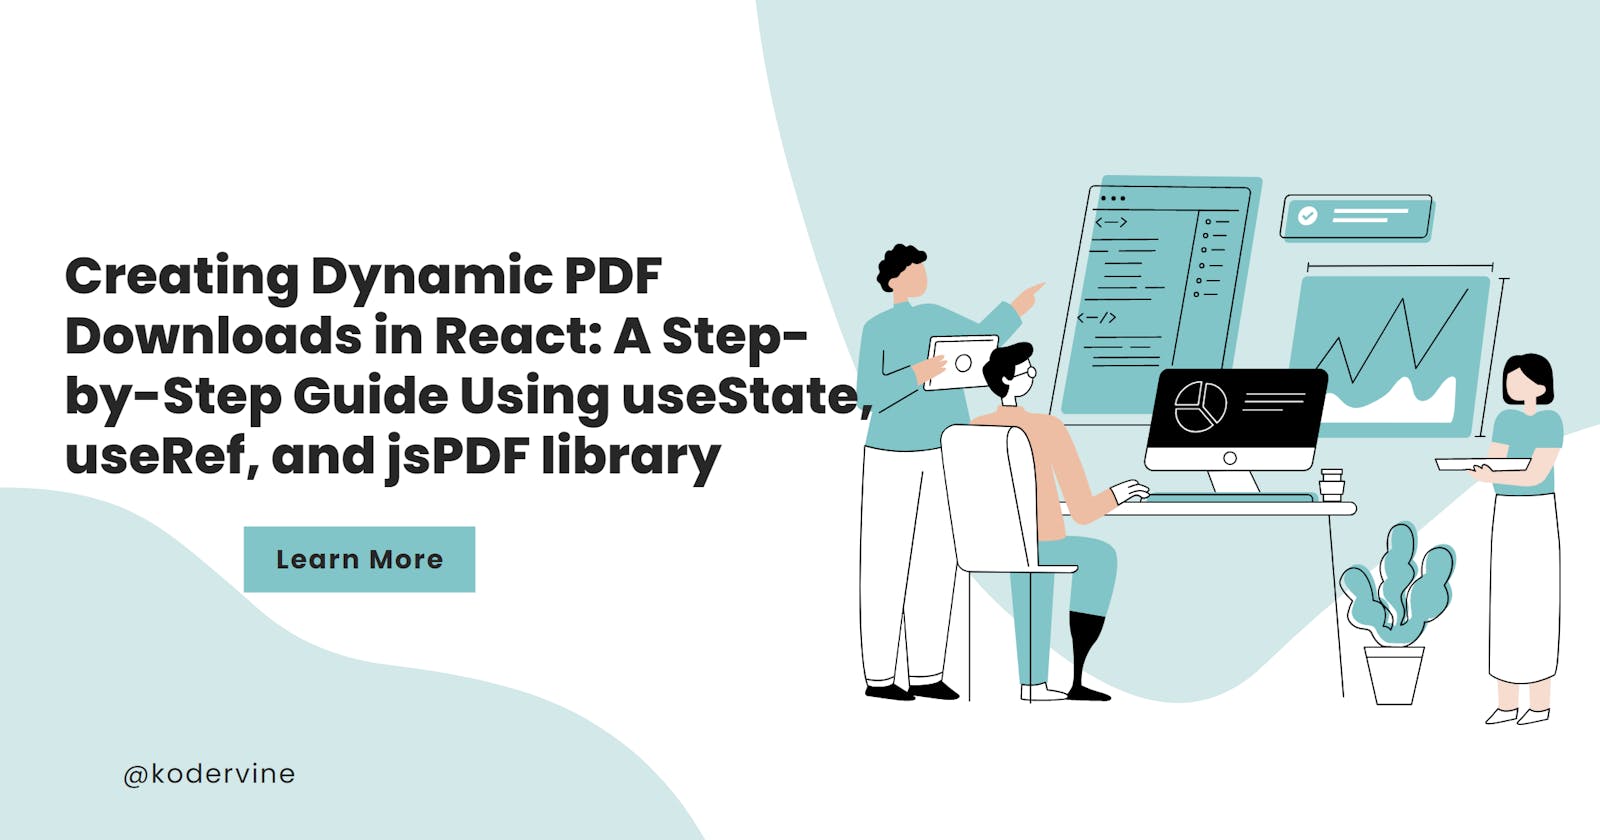 Creating Dynamic PDF Downloads in React: A Step-by-Step Guide Using useState, useRef, and jsPDF library